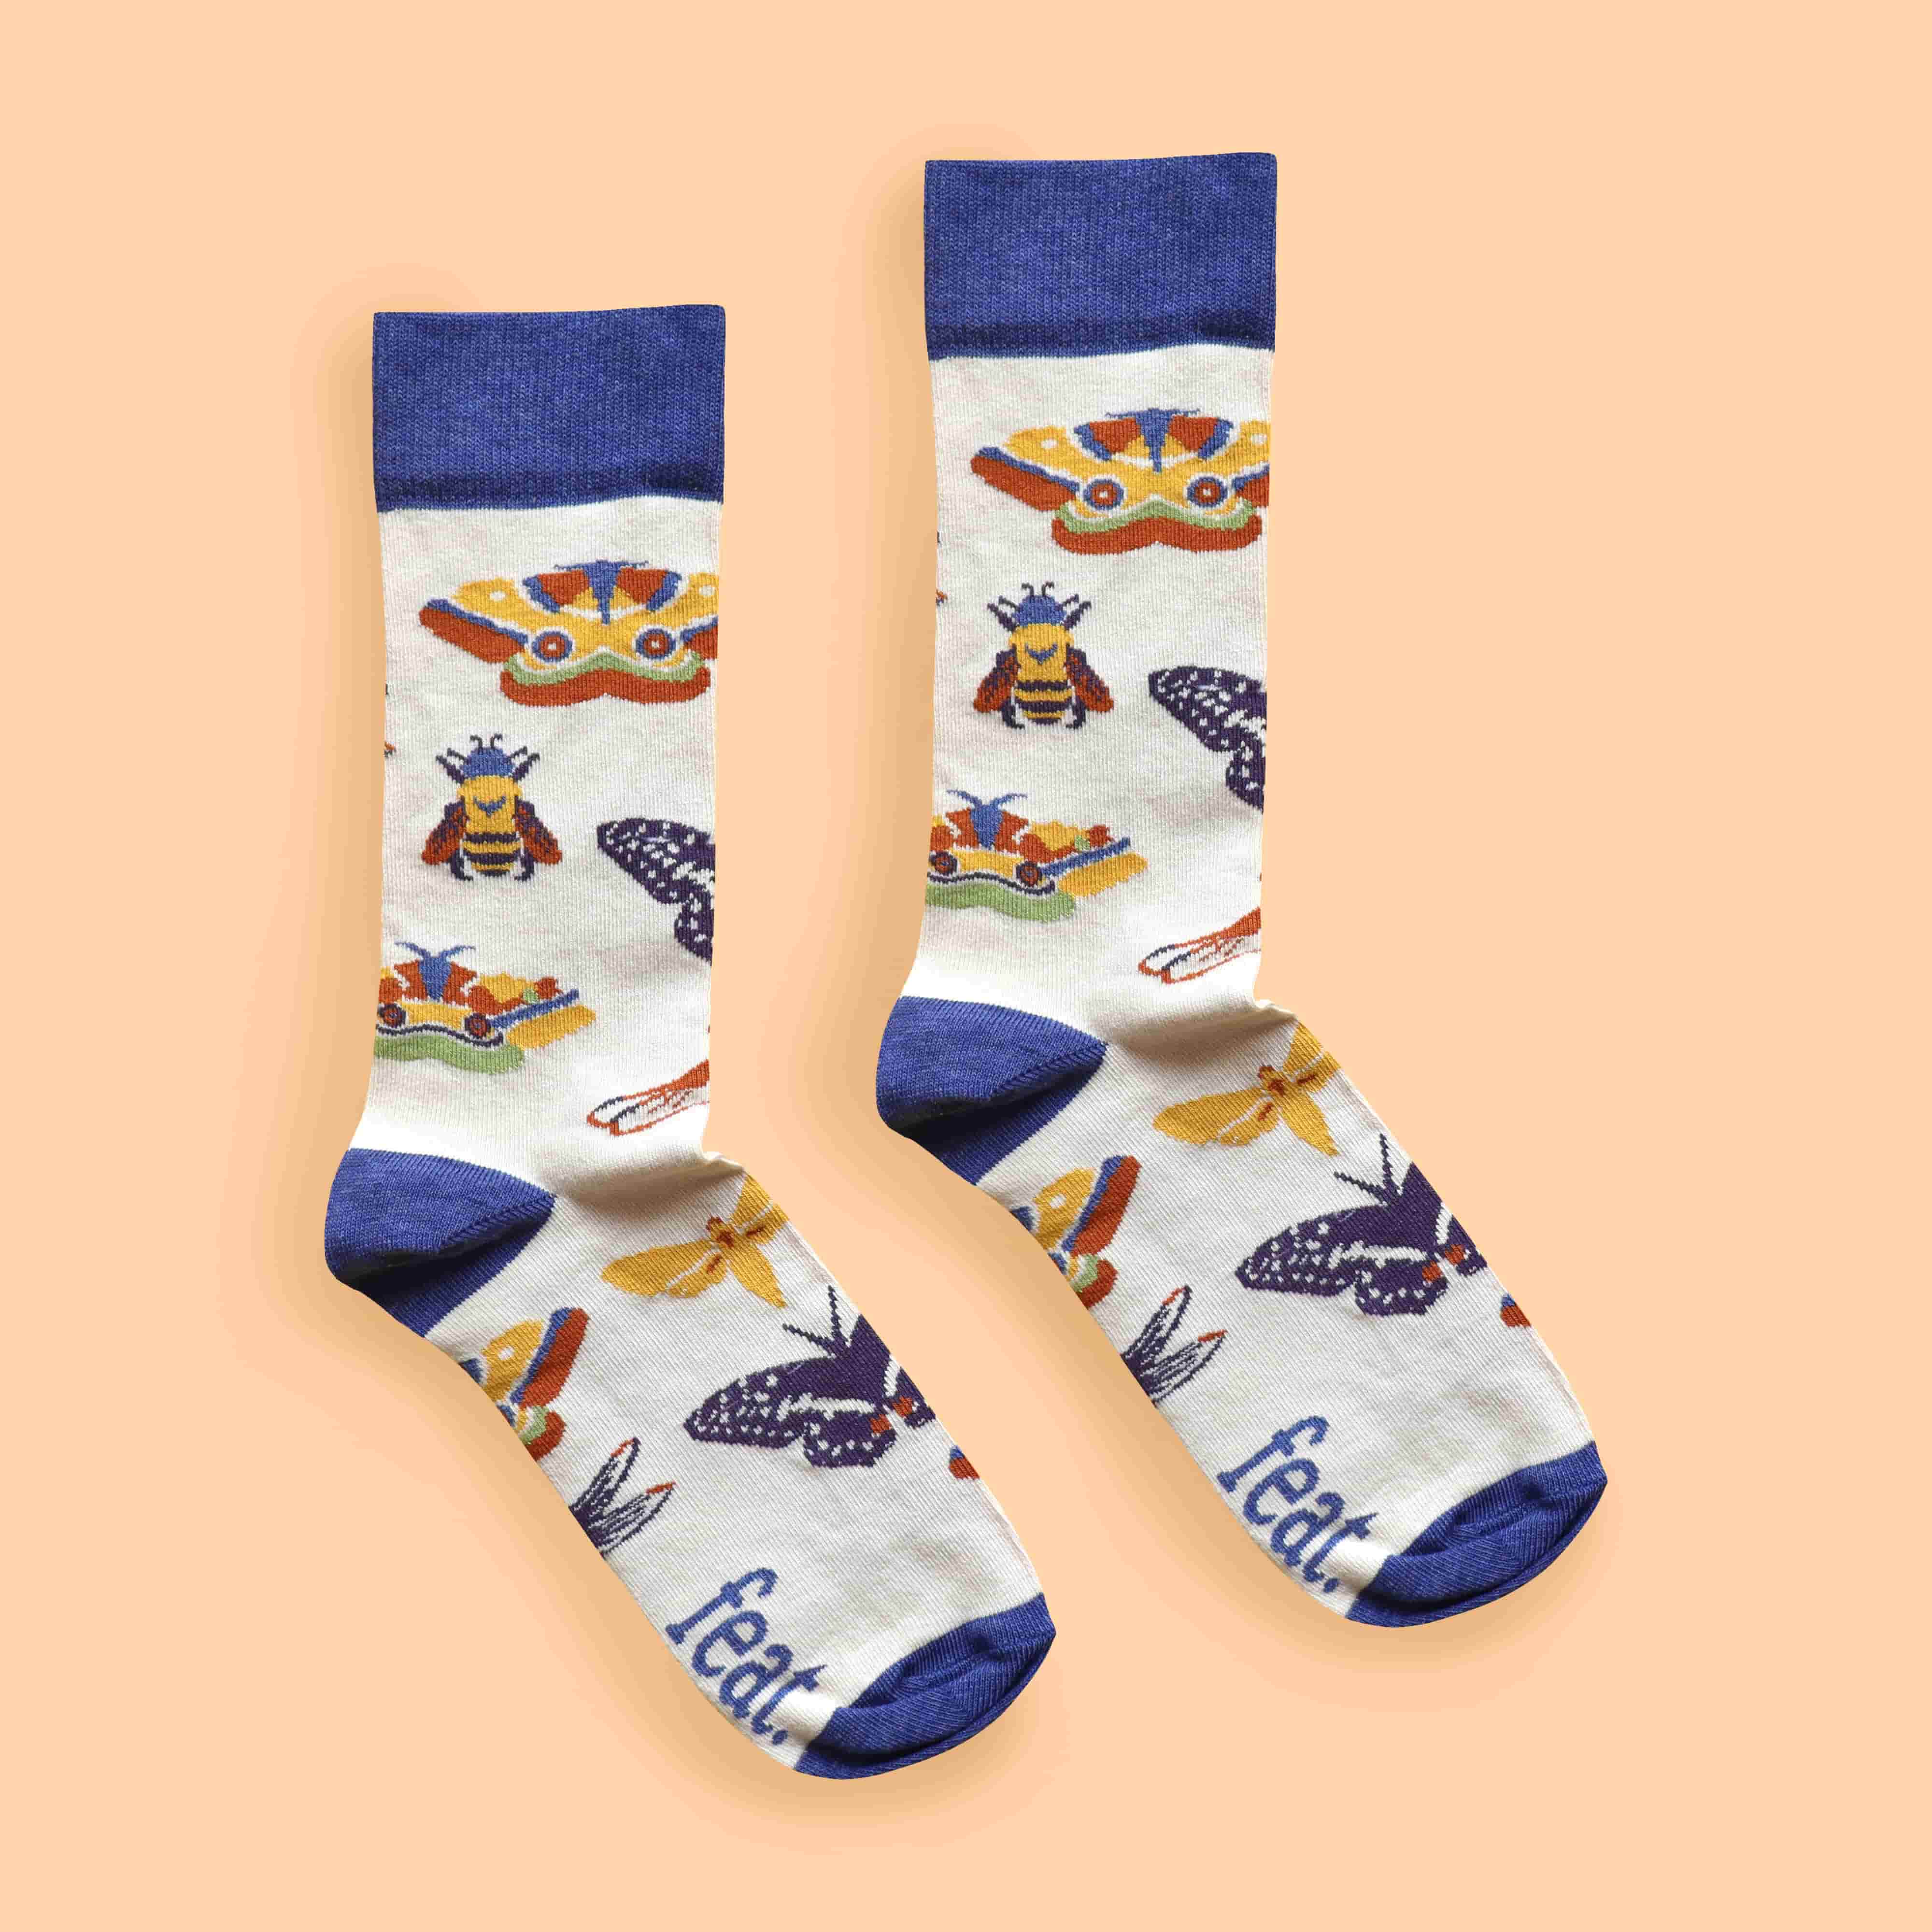 Ladies’ Insects socks